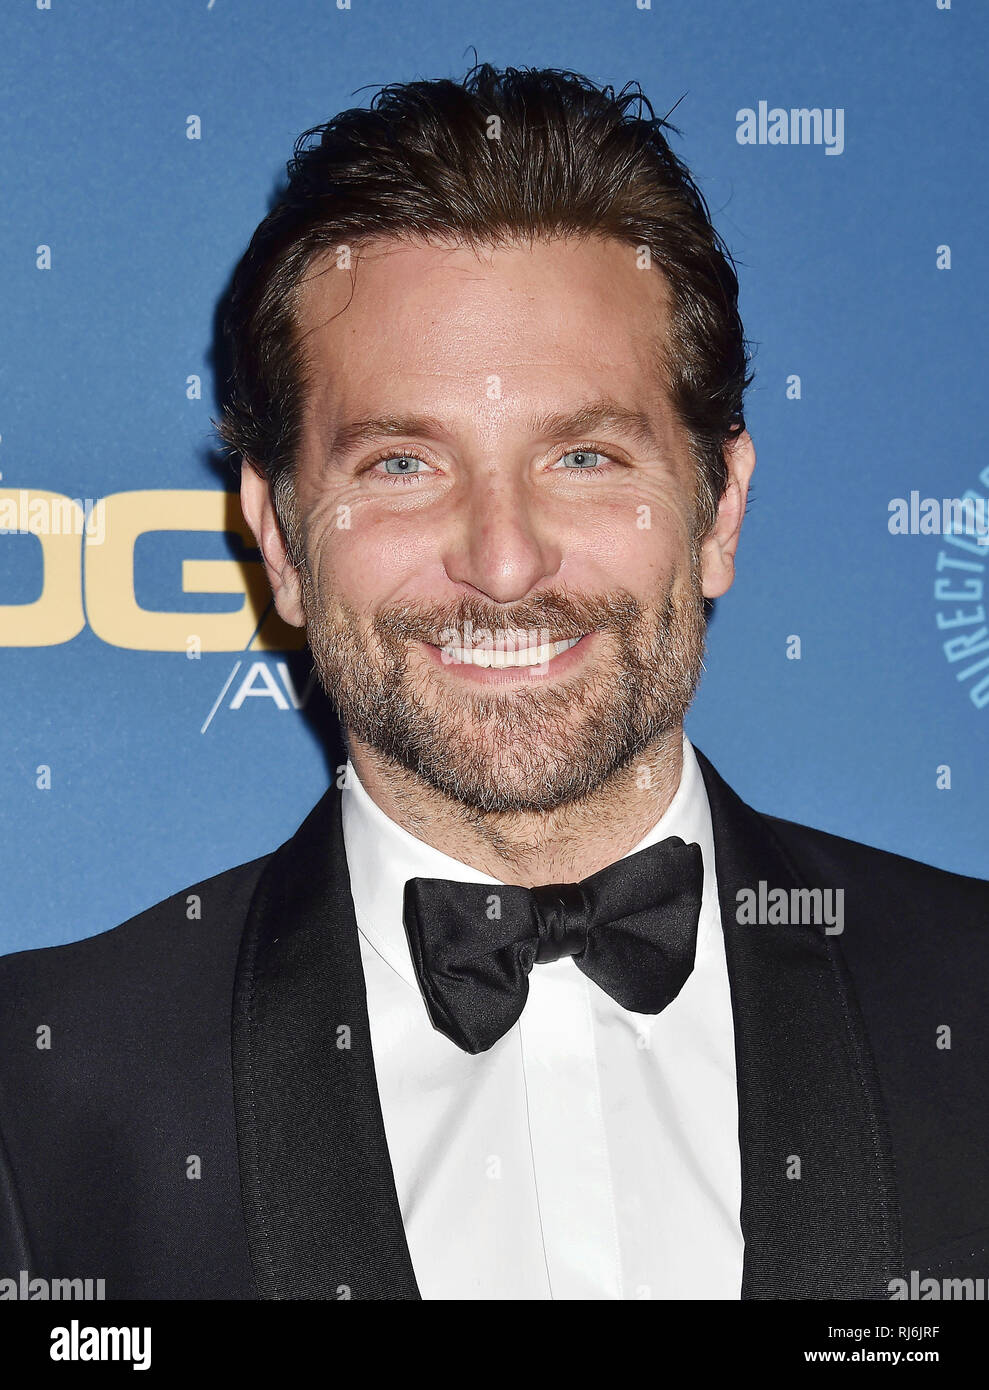 BRADL;EY COOPER American film actor at  the 71st Annual Directors Guild Of America Awards at The Ray Dolby Ballroom at Hollywood & Highland Center on February 02, 2019 in Hollywood, California. Photo: Jeffrey Mayer Stock Photo